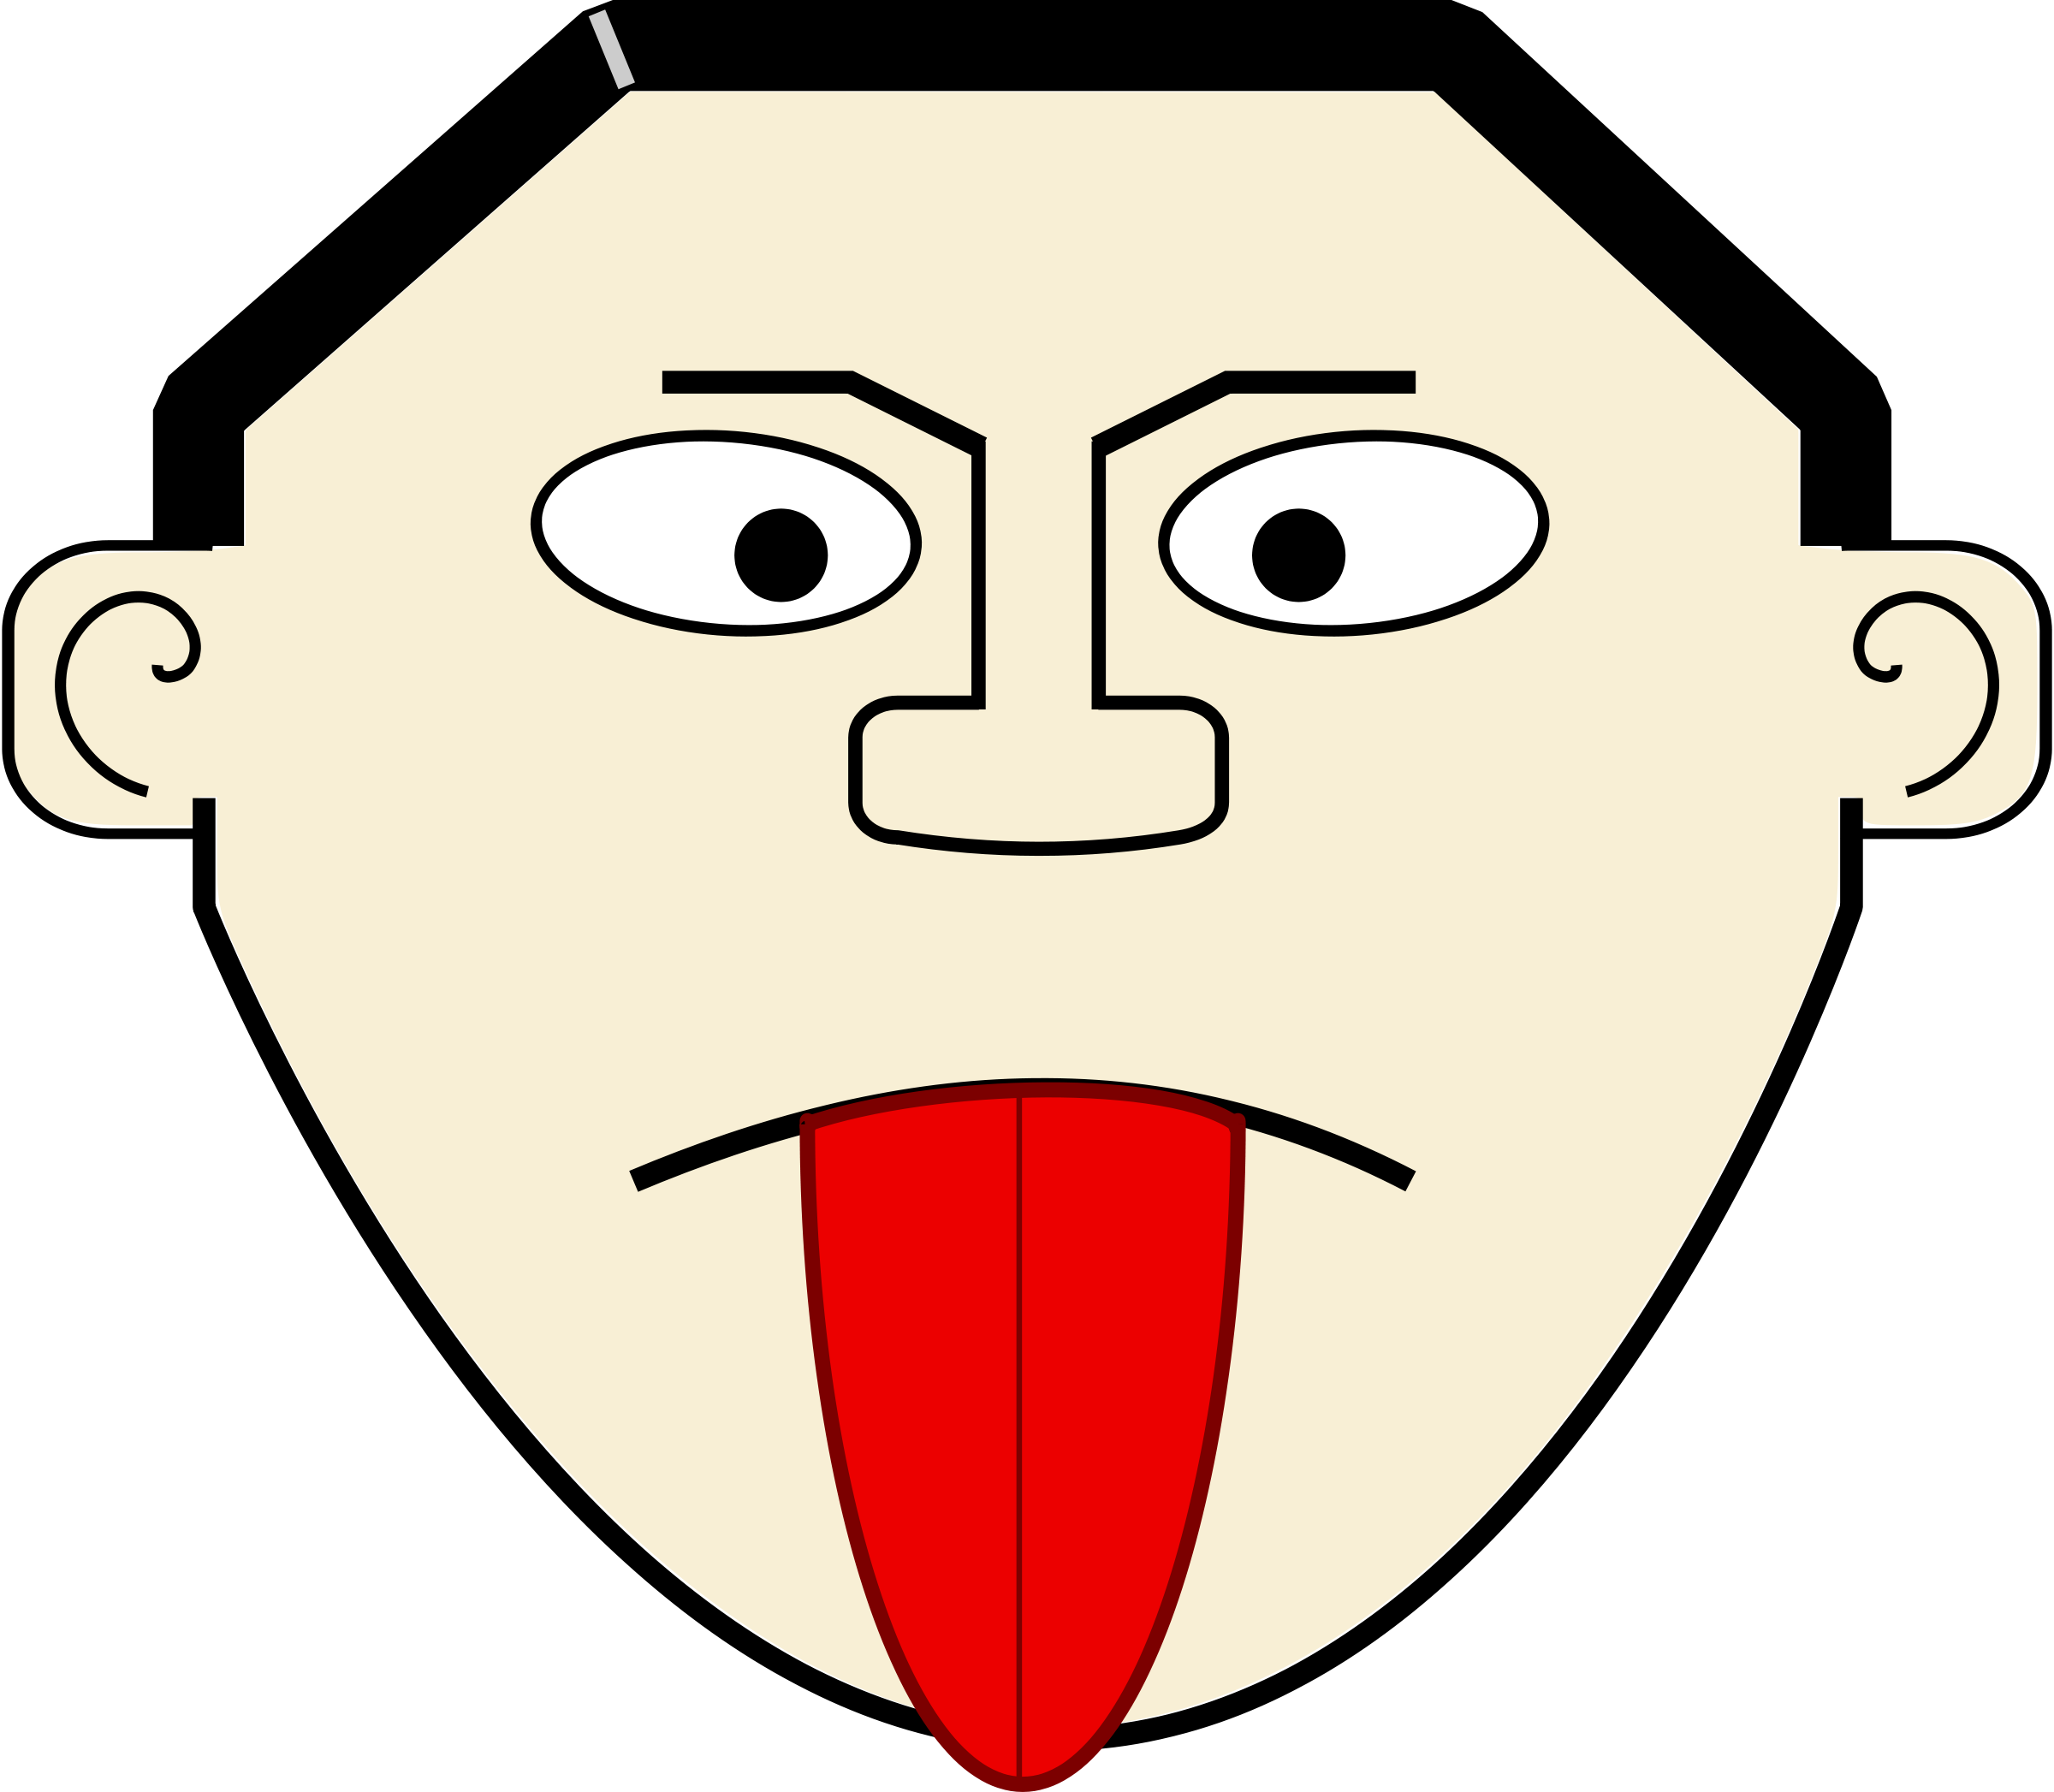 face tongue sticking out Cartoon with